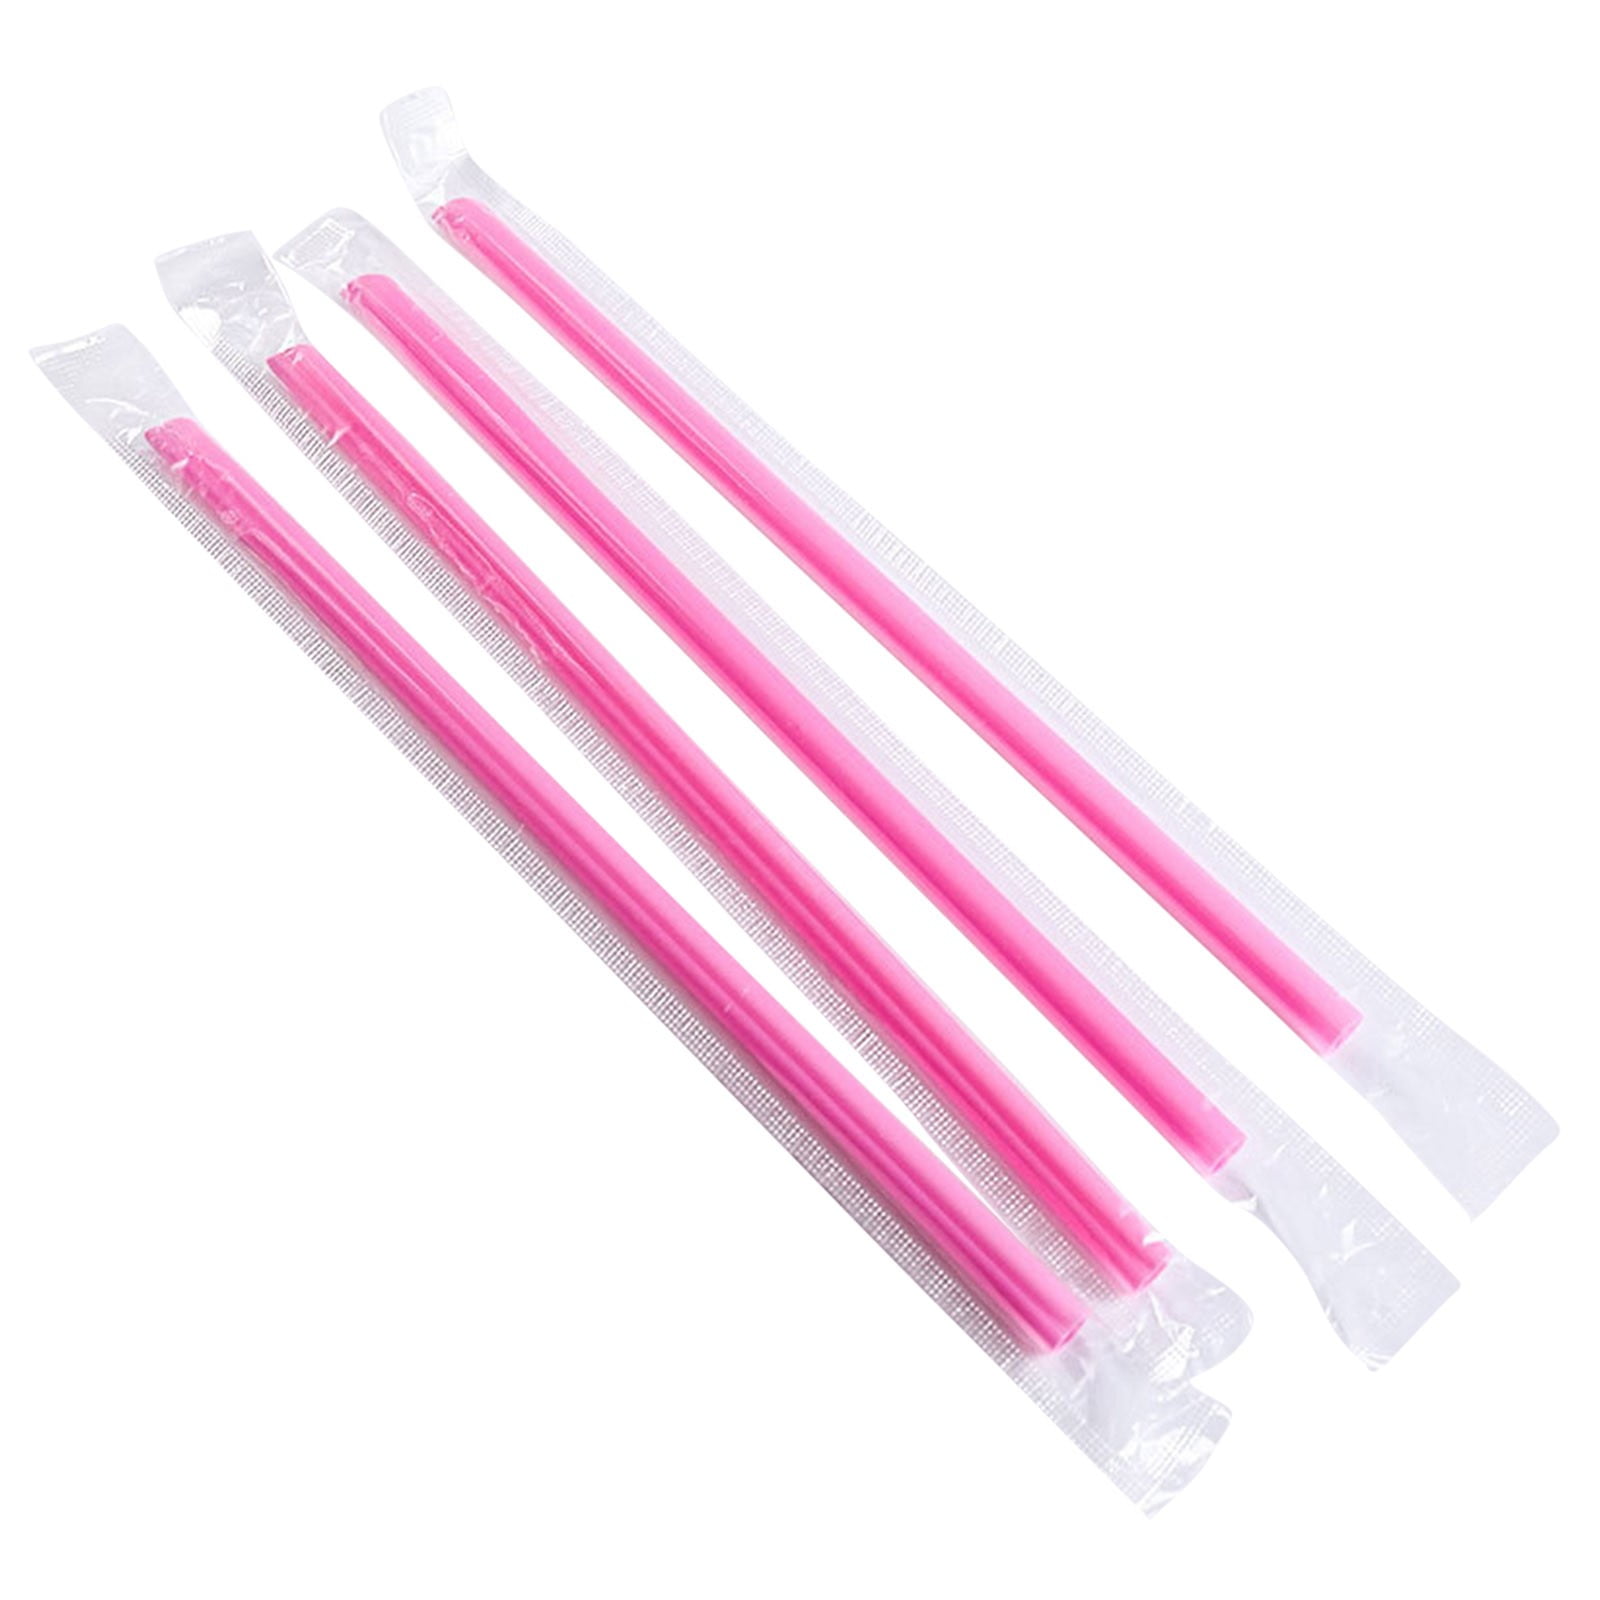 The best MOON Jumbo Smoothie Straws Heart shaped Pink Straws Disposable  Drinking cute straws Individually Wrapped Pink Plastic Straws milkshake